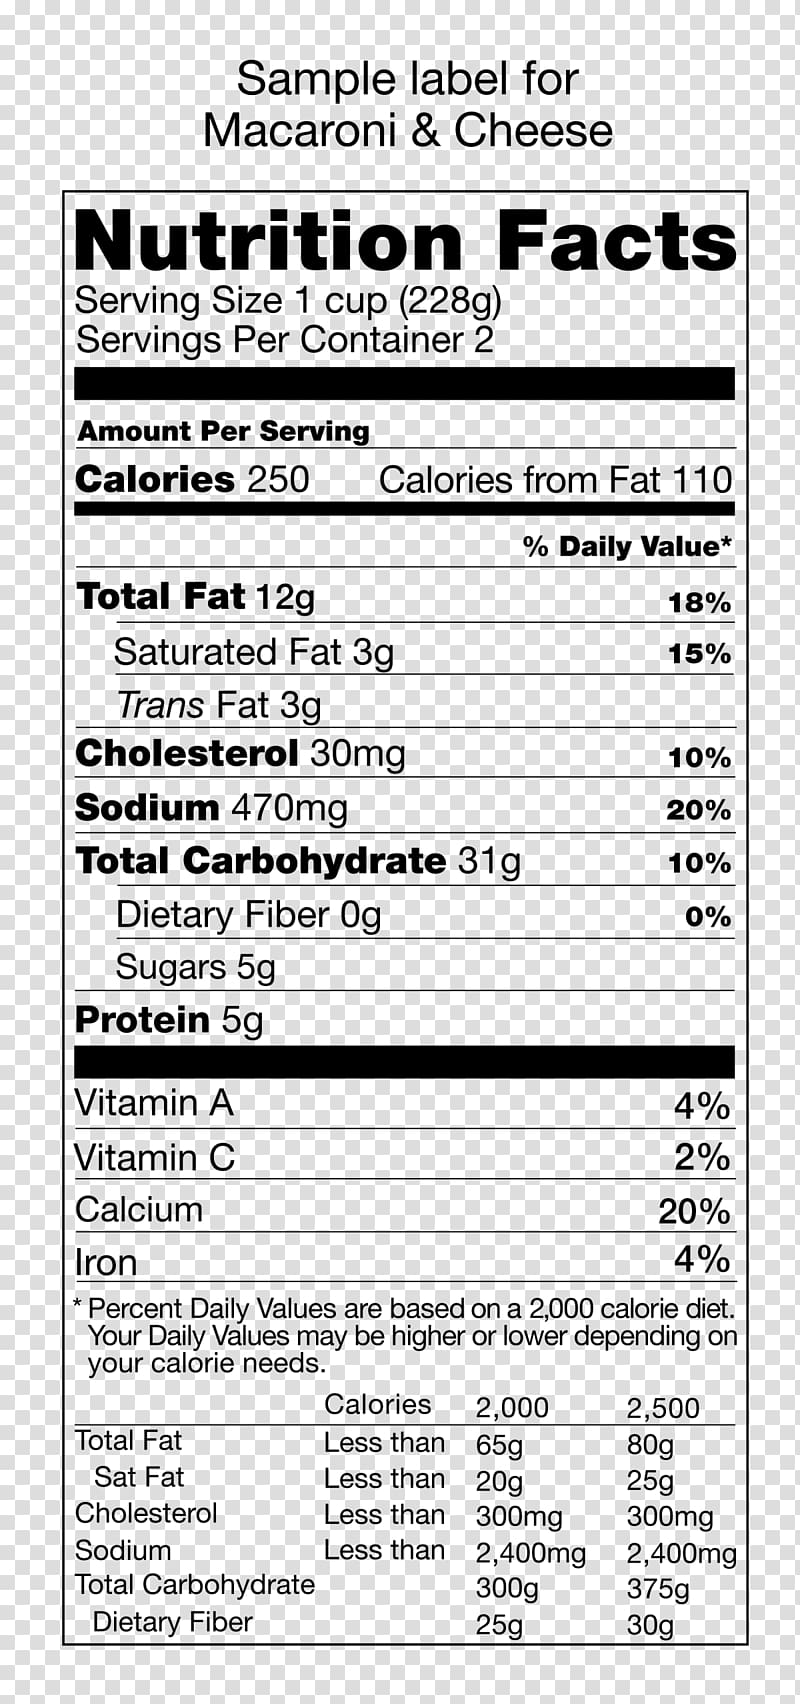 Nutrient Nutrition facts label Cat Food, party table transparent background PNG clipart